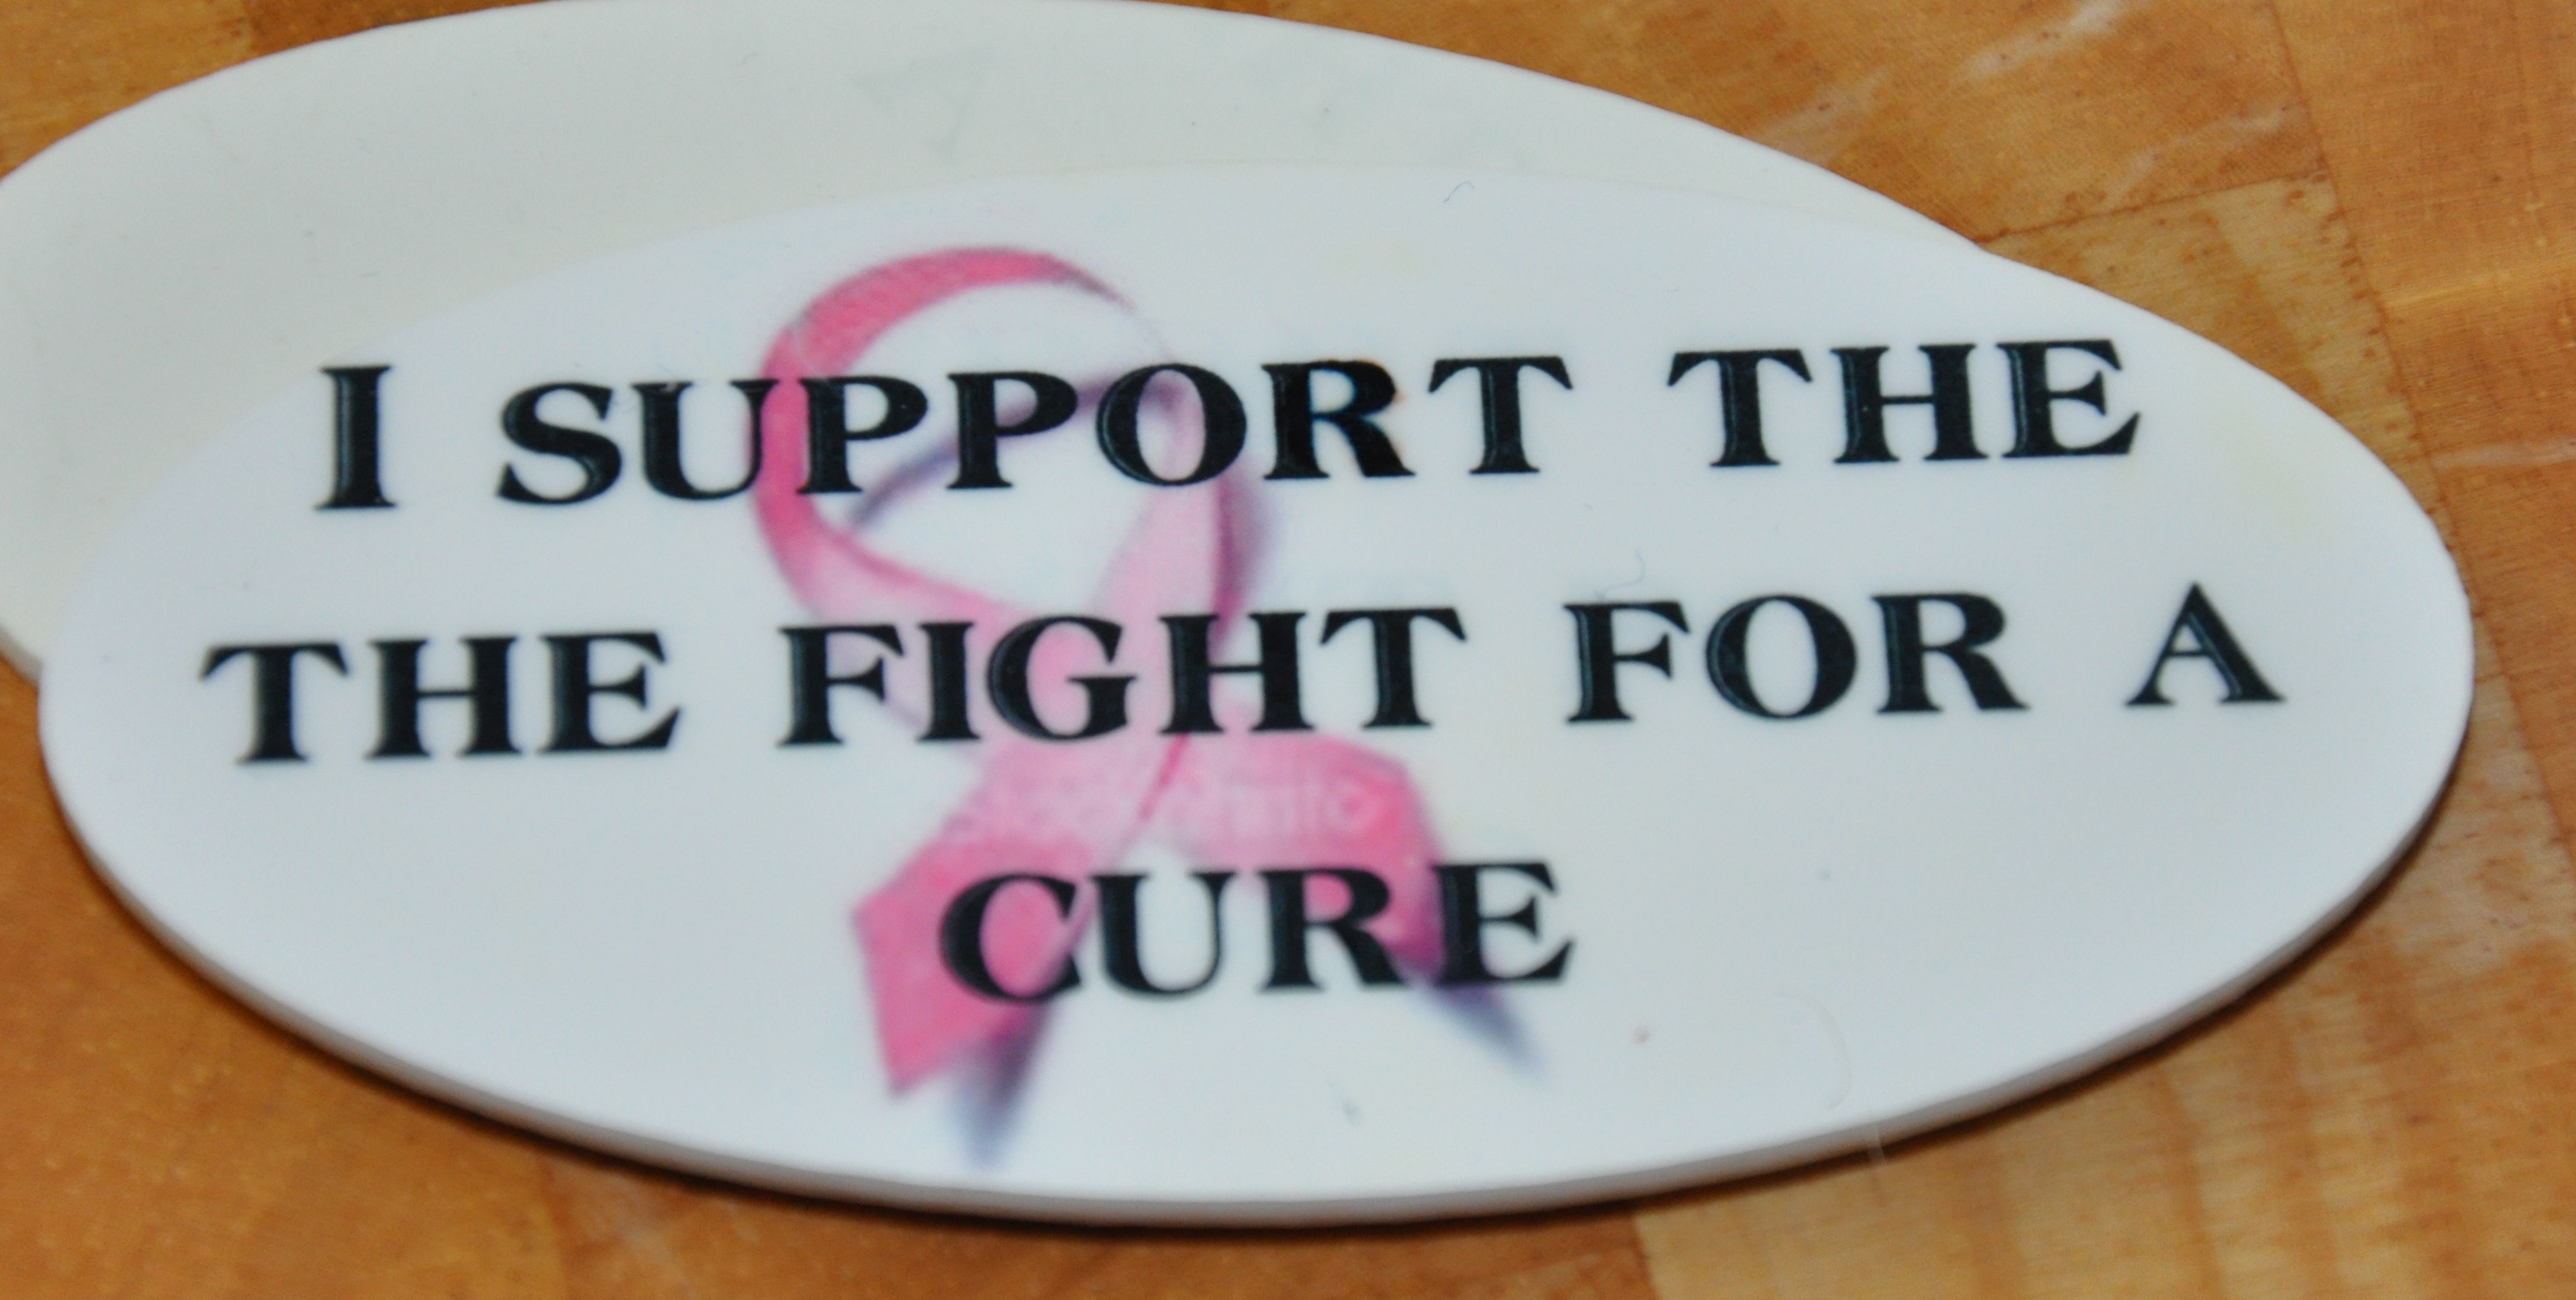 Cancer Awareness Pin made with sublimation printing